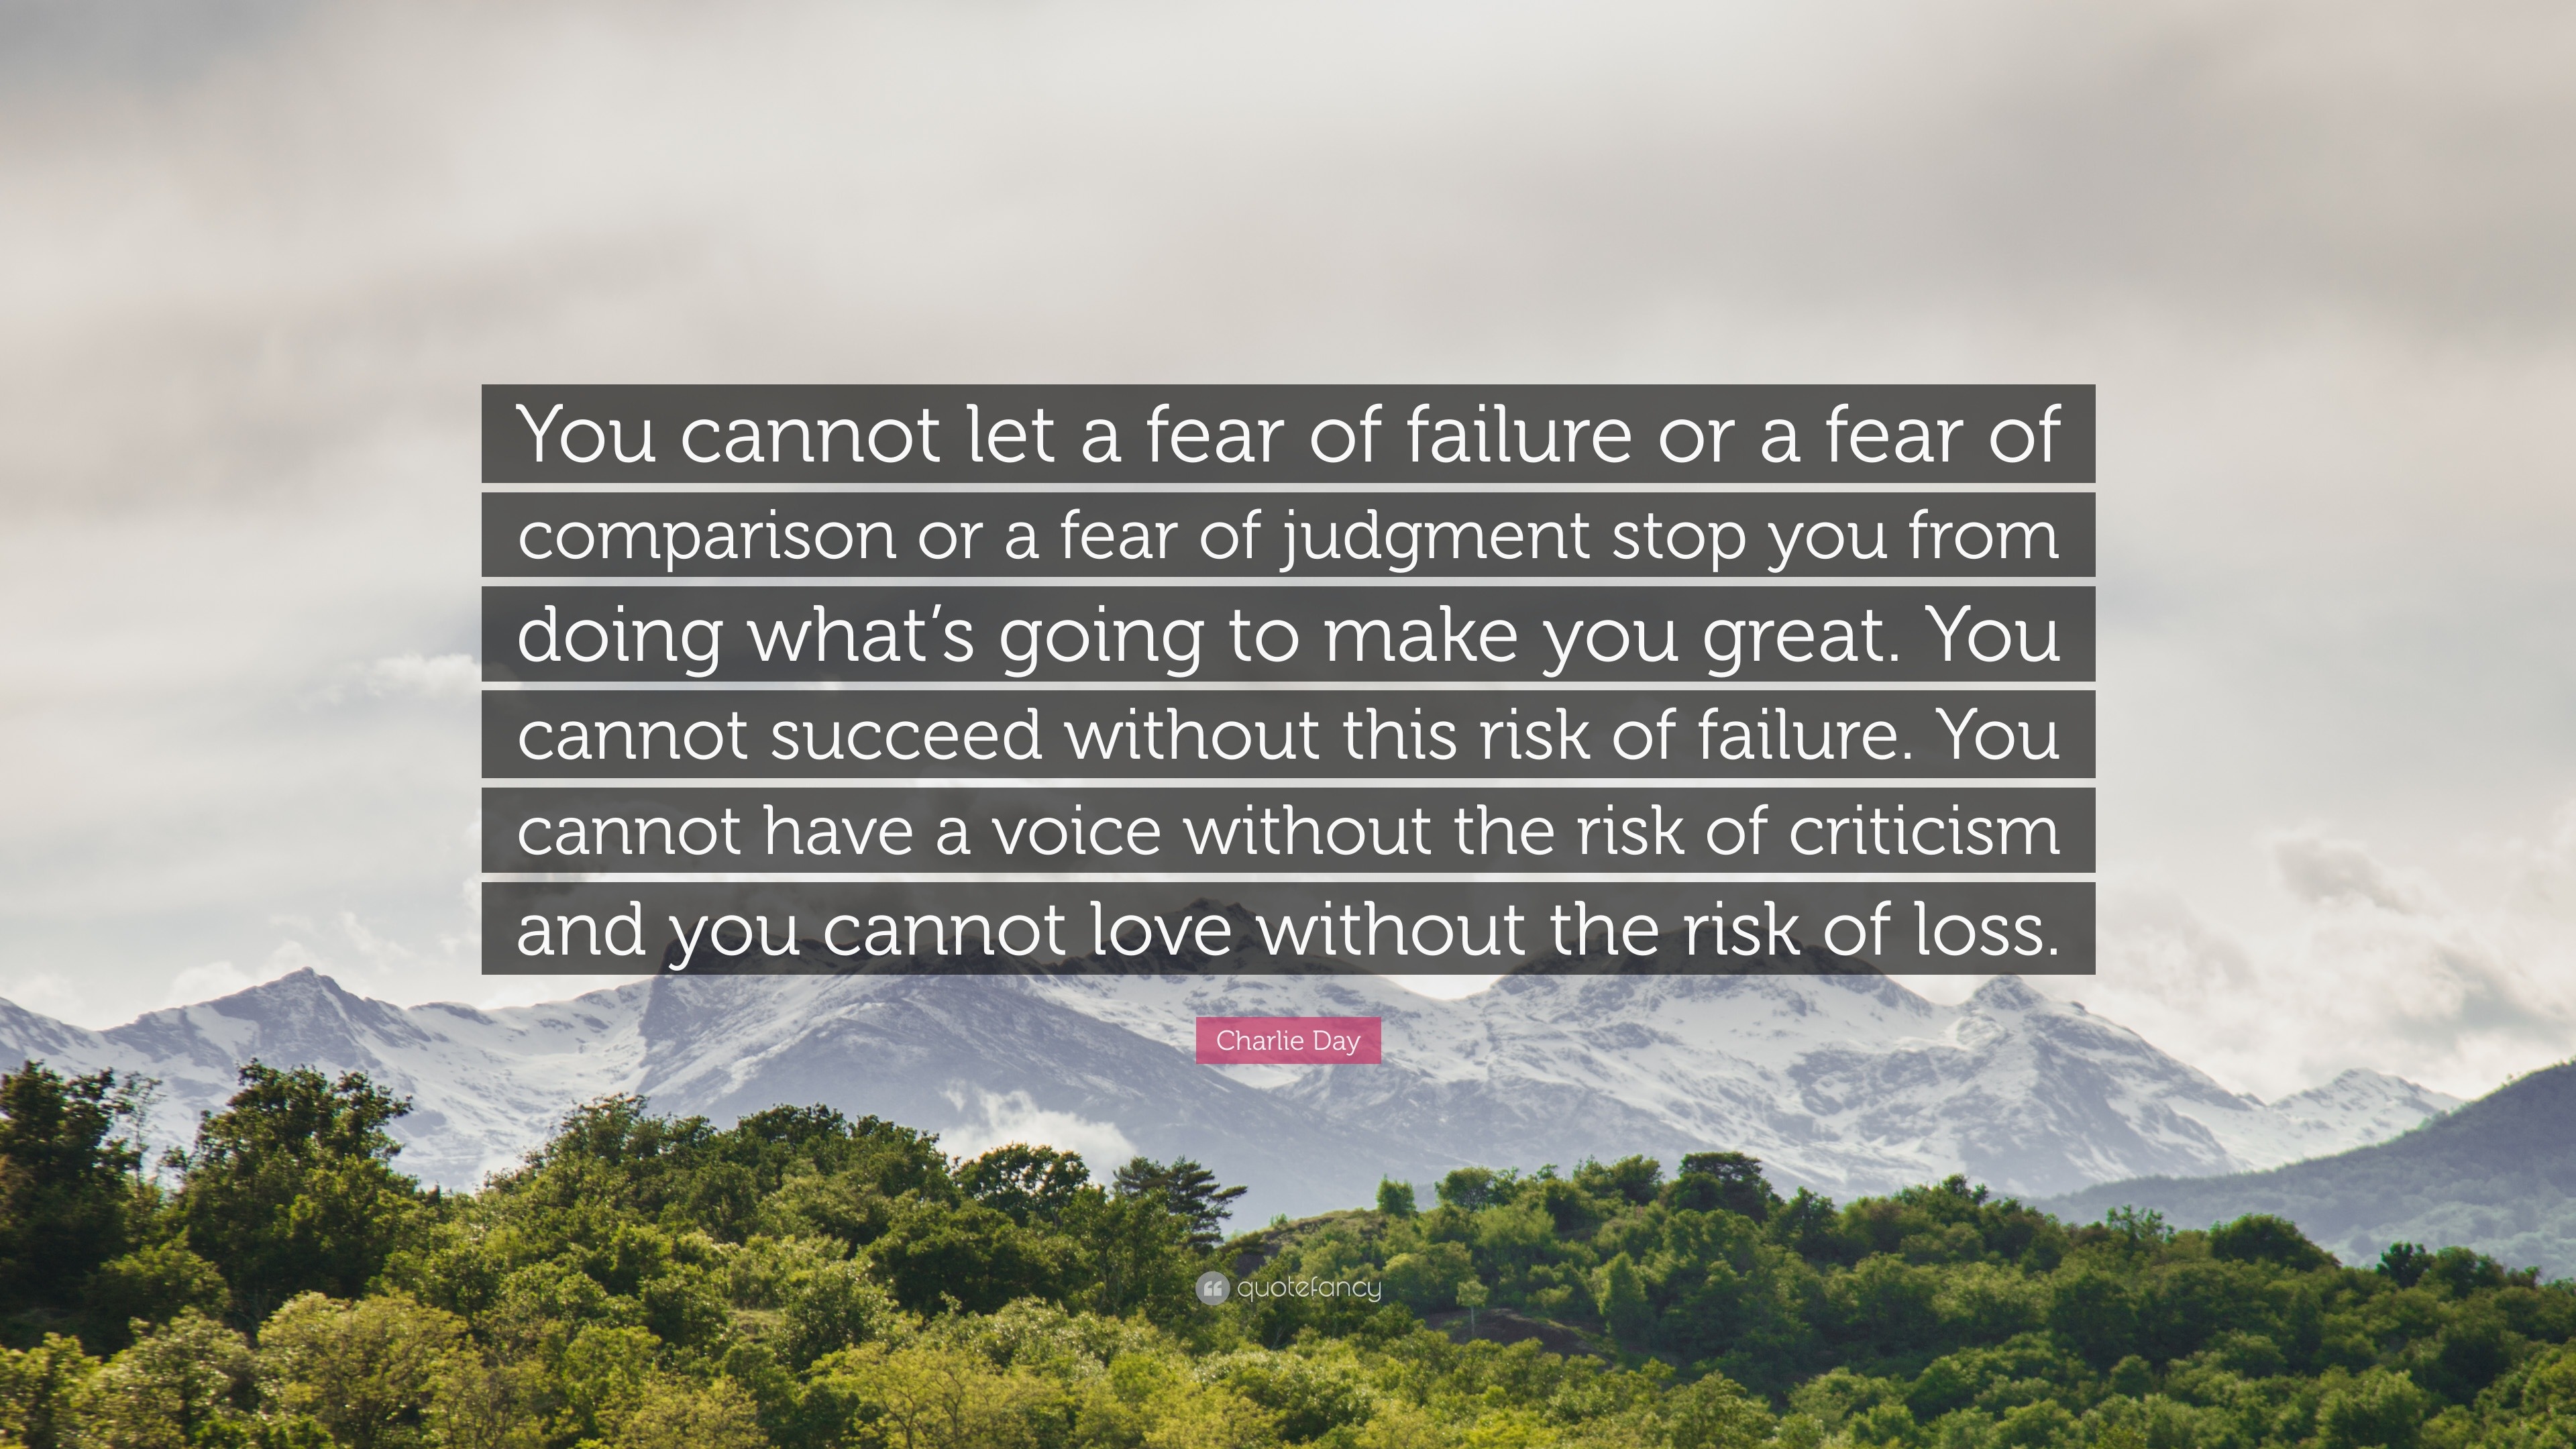 Charlie Day Quote: “You cannot let a fear of failure or a fear of